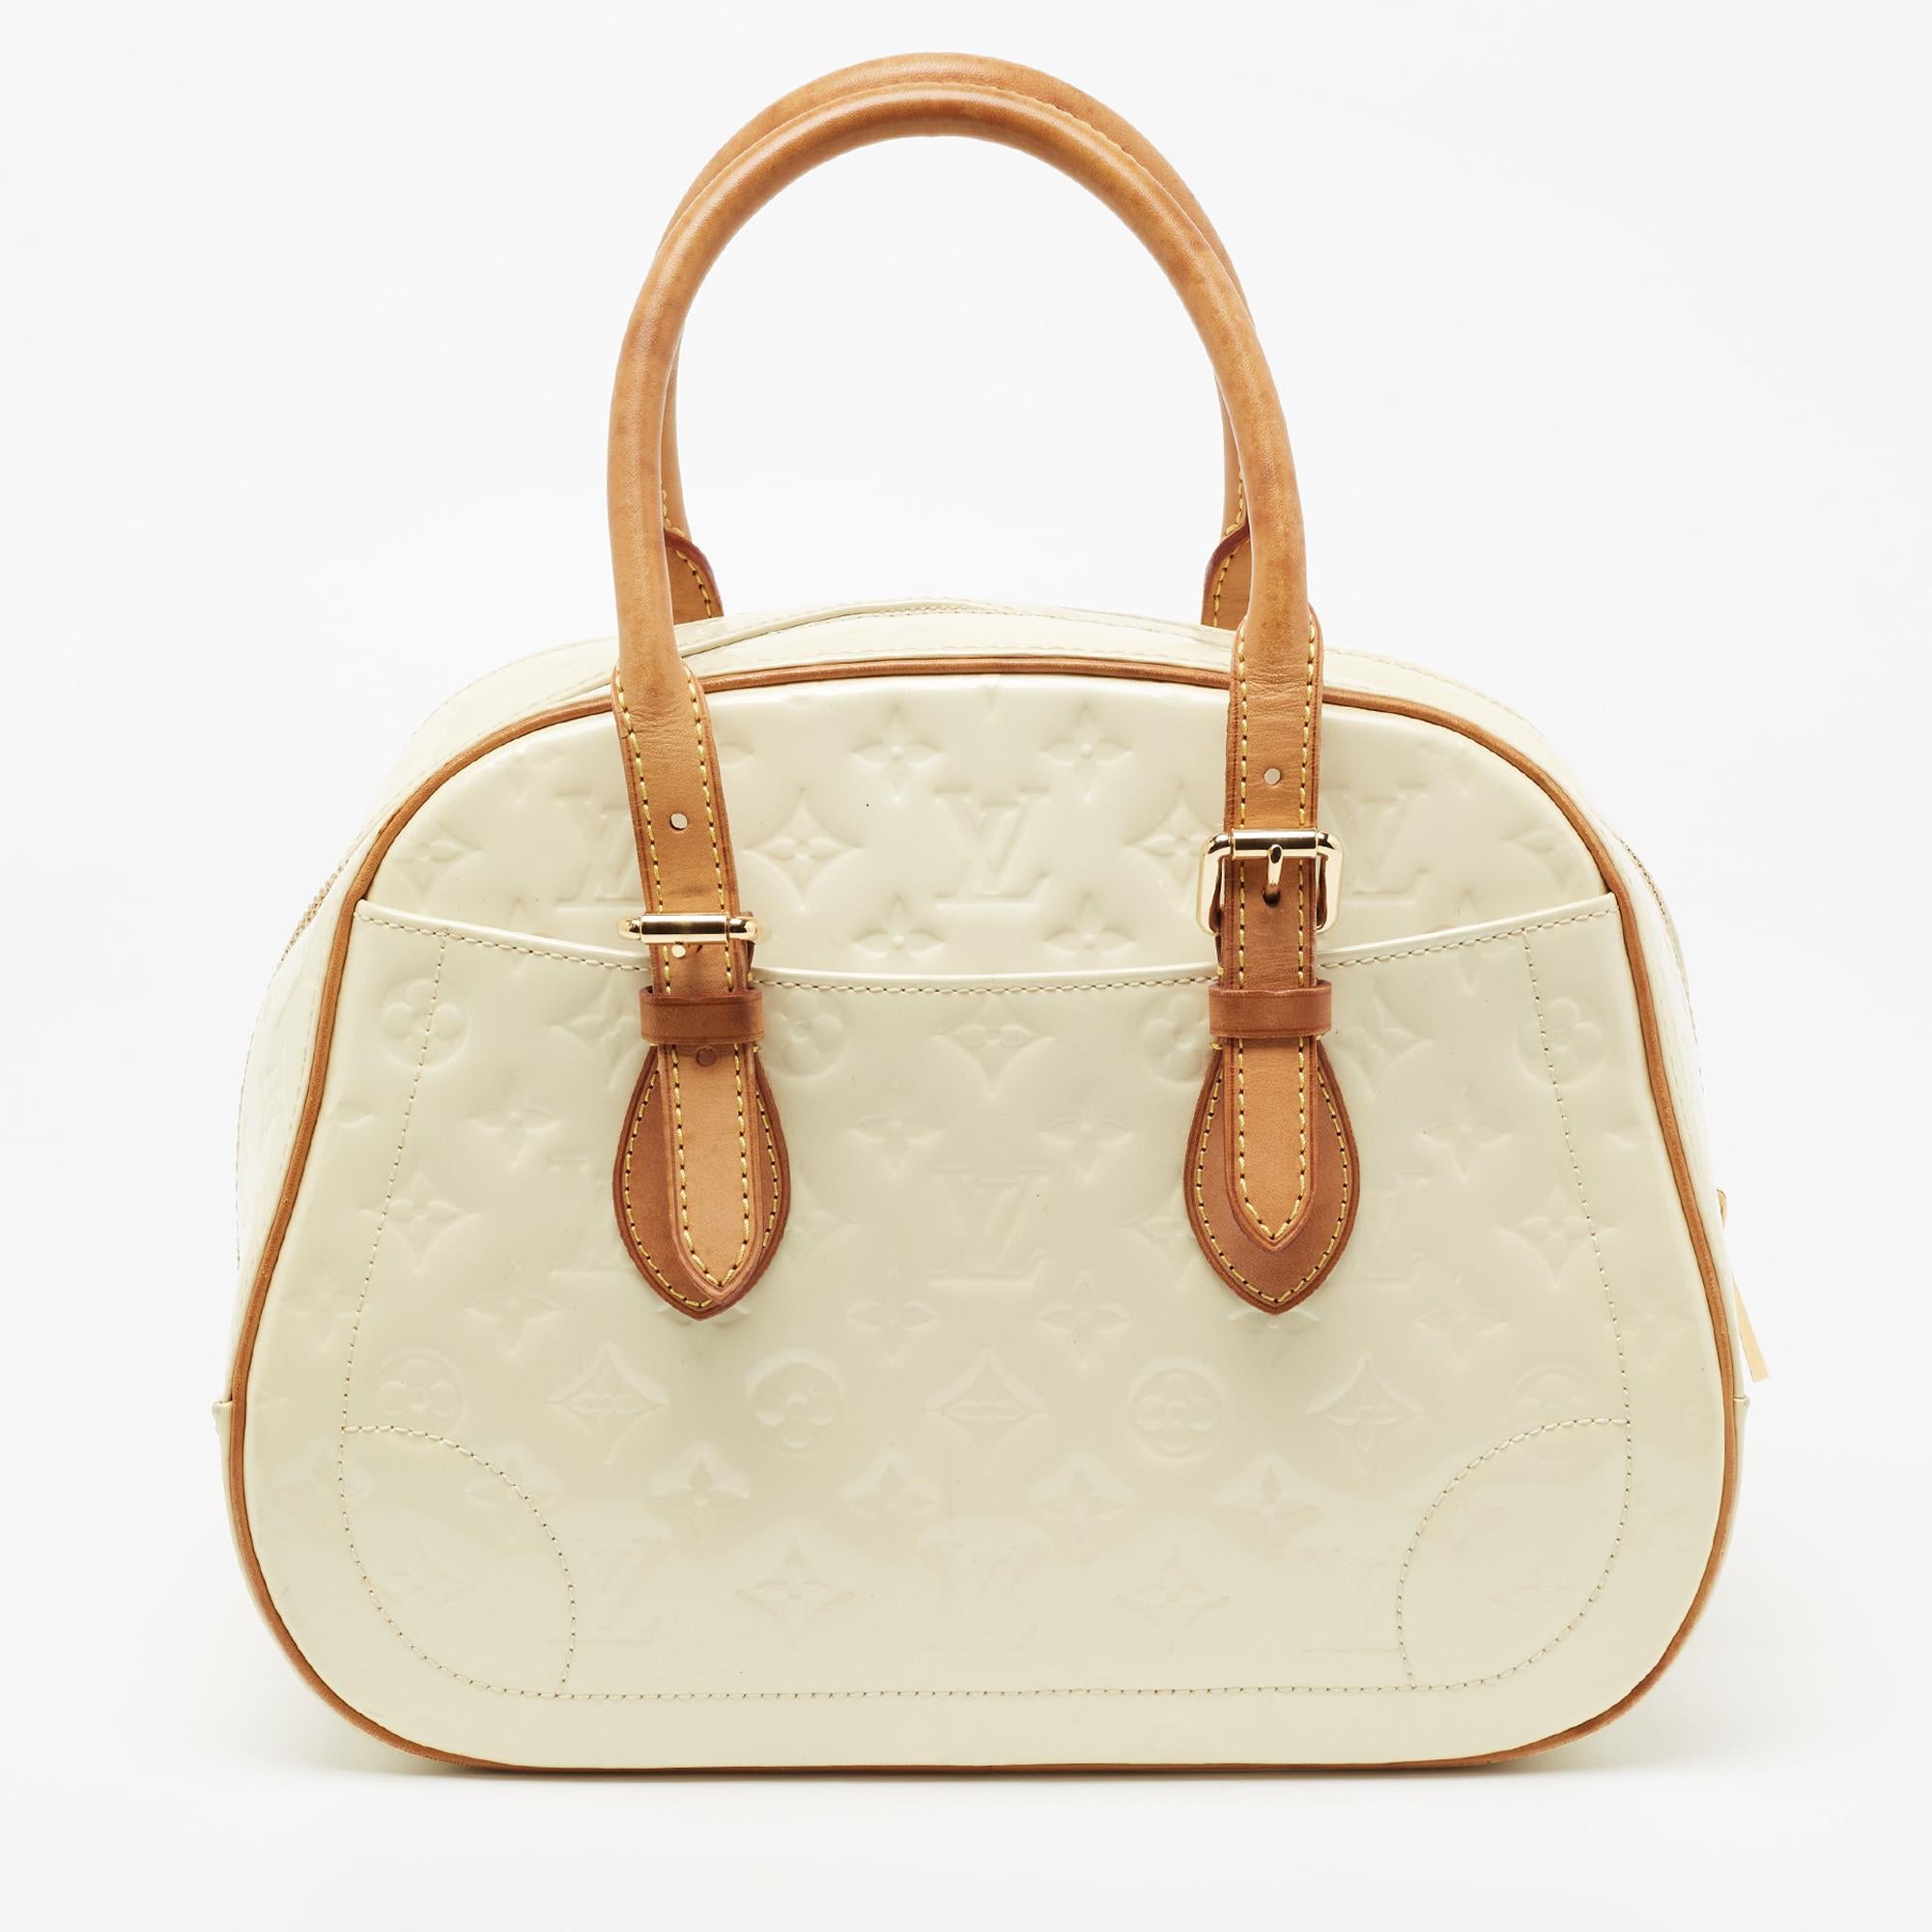 Well-made and essaying luxury, this Louis Vuitton bag will take you through your day with ease. Crafted from cream Monogram Vernis, it features dual handles and exterior slip pockets. The bag is secured by a wide two-way zip closure that opens to a